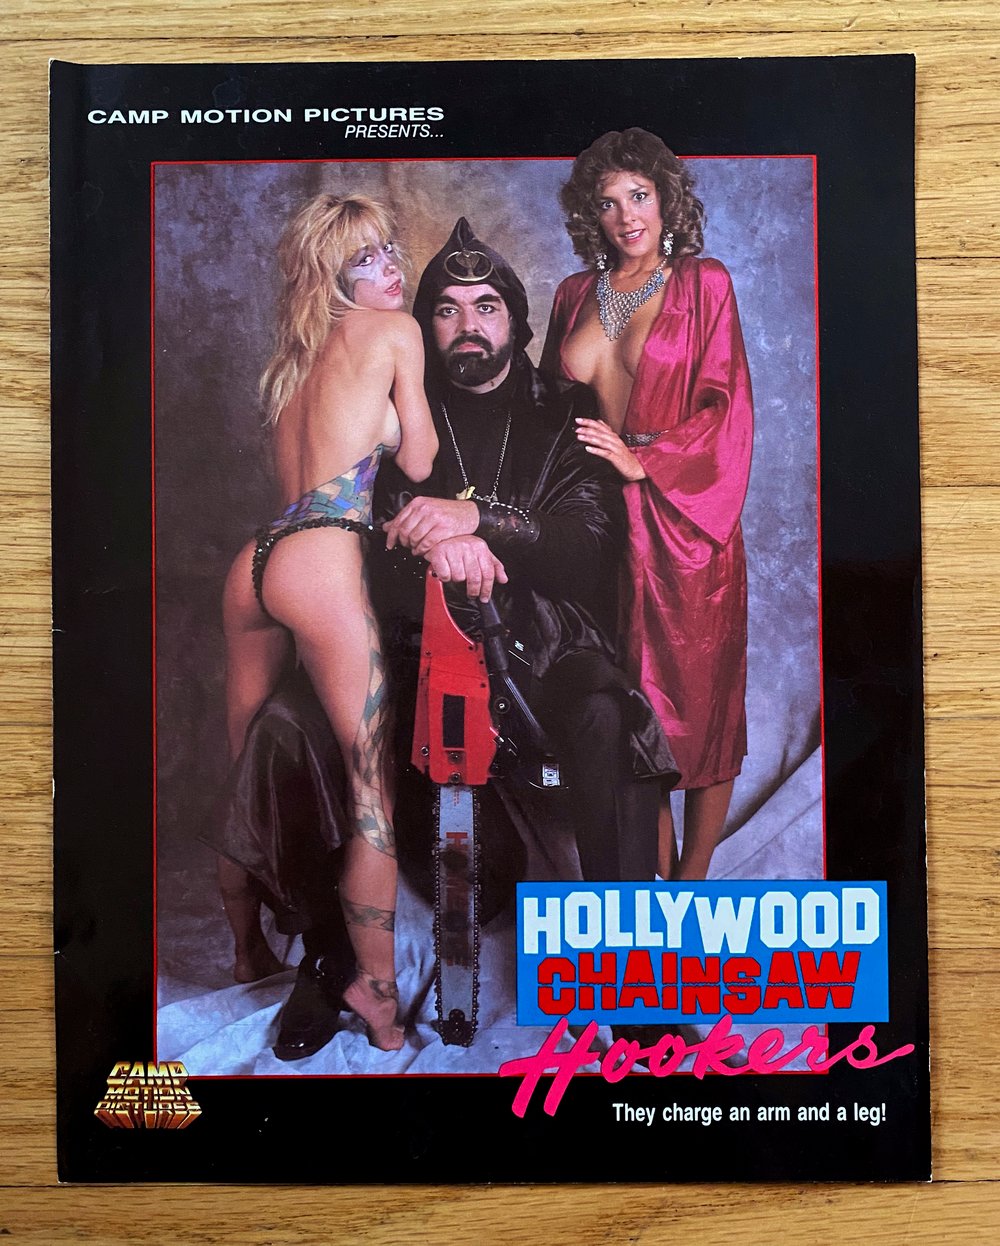 1987 HOLLYWOOD CHAINSAW HOOKERS Original Camp Motion Pictures Promotional Ad Slick